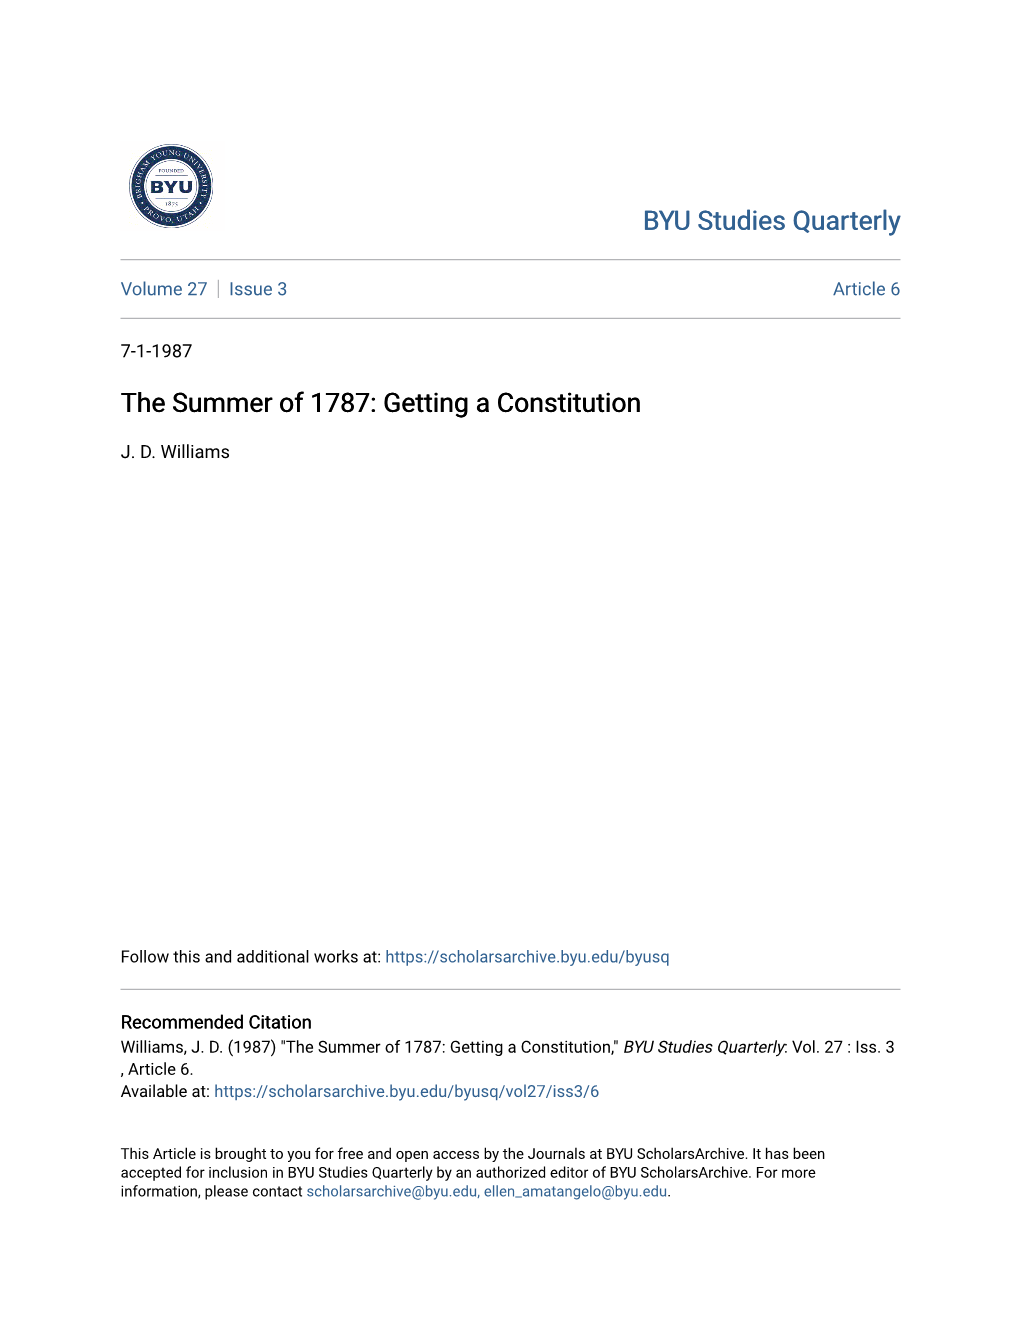 The Summer of 1787: Getting a Constitution